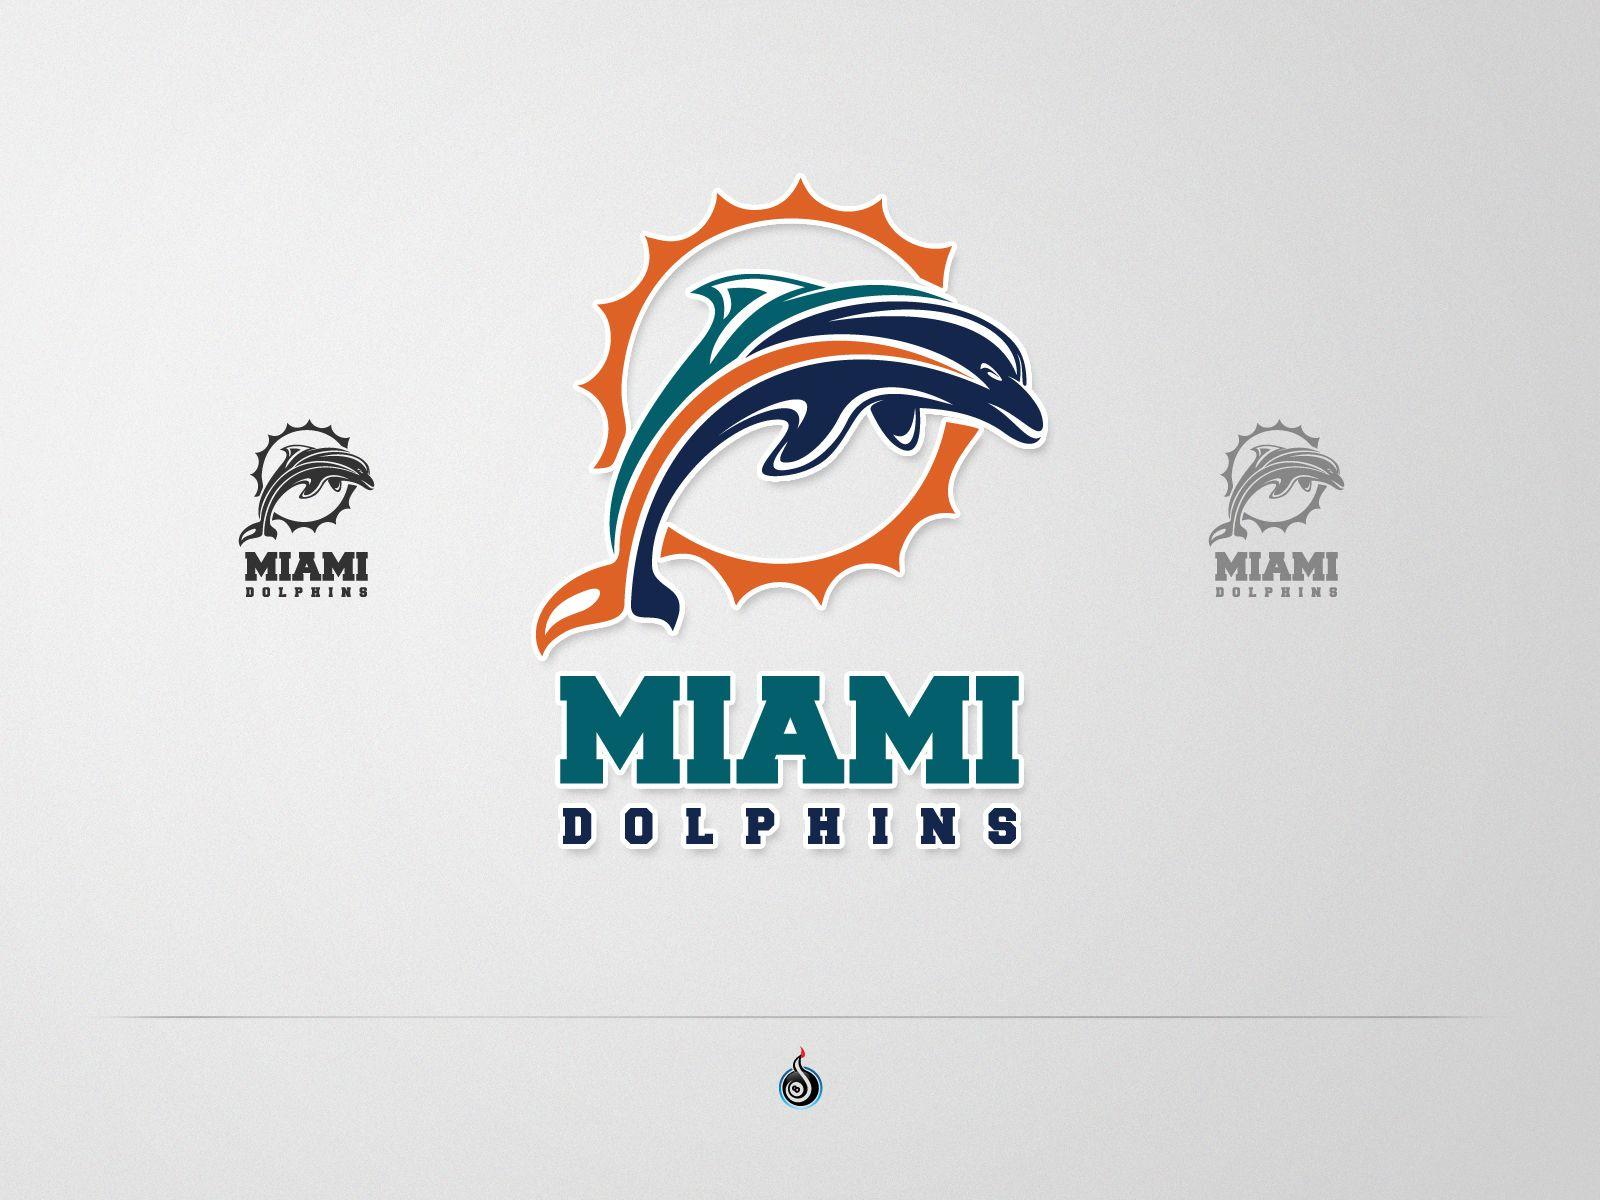 New Dolphins Logo - Miami Dolphins New Logo: Top Design Possibilities For The Team's